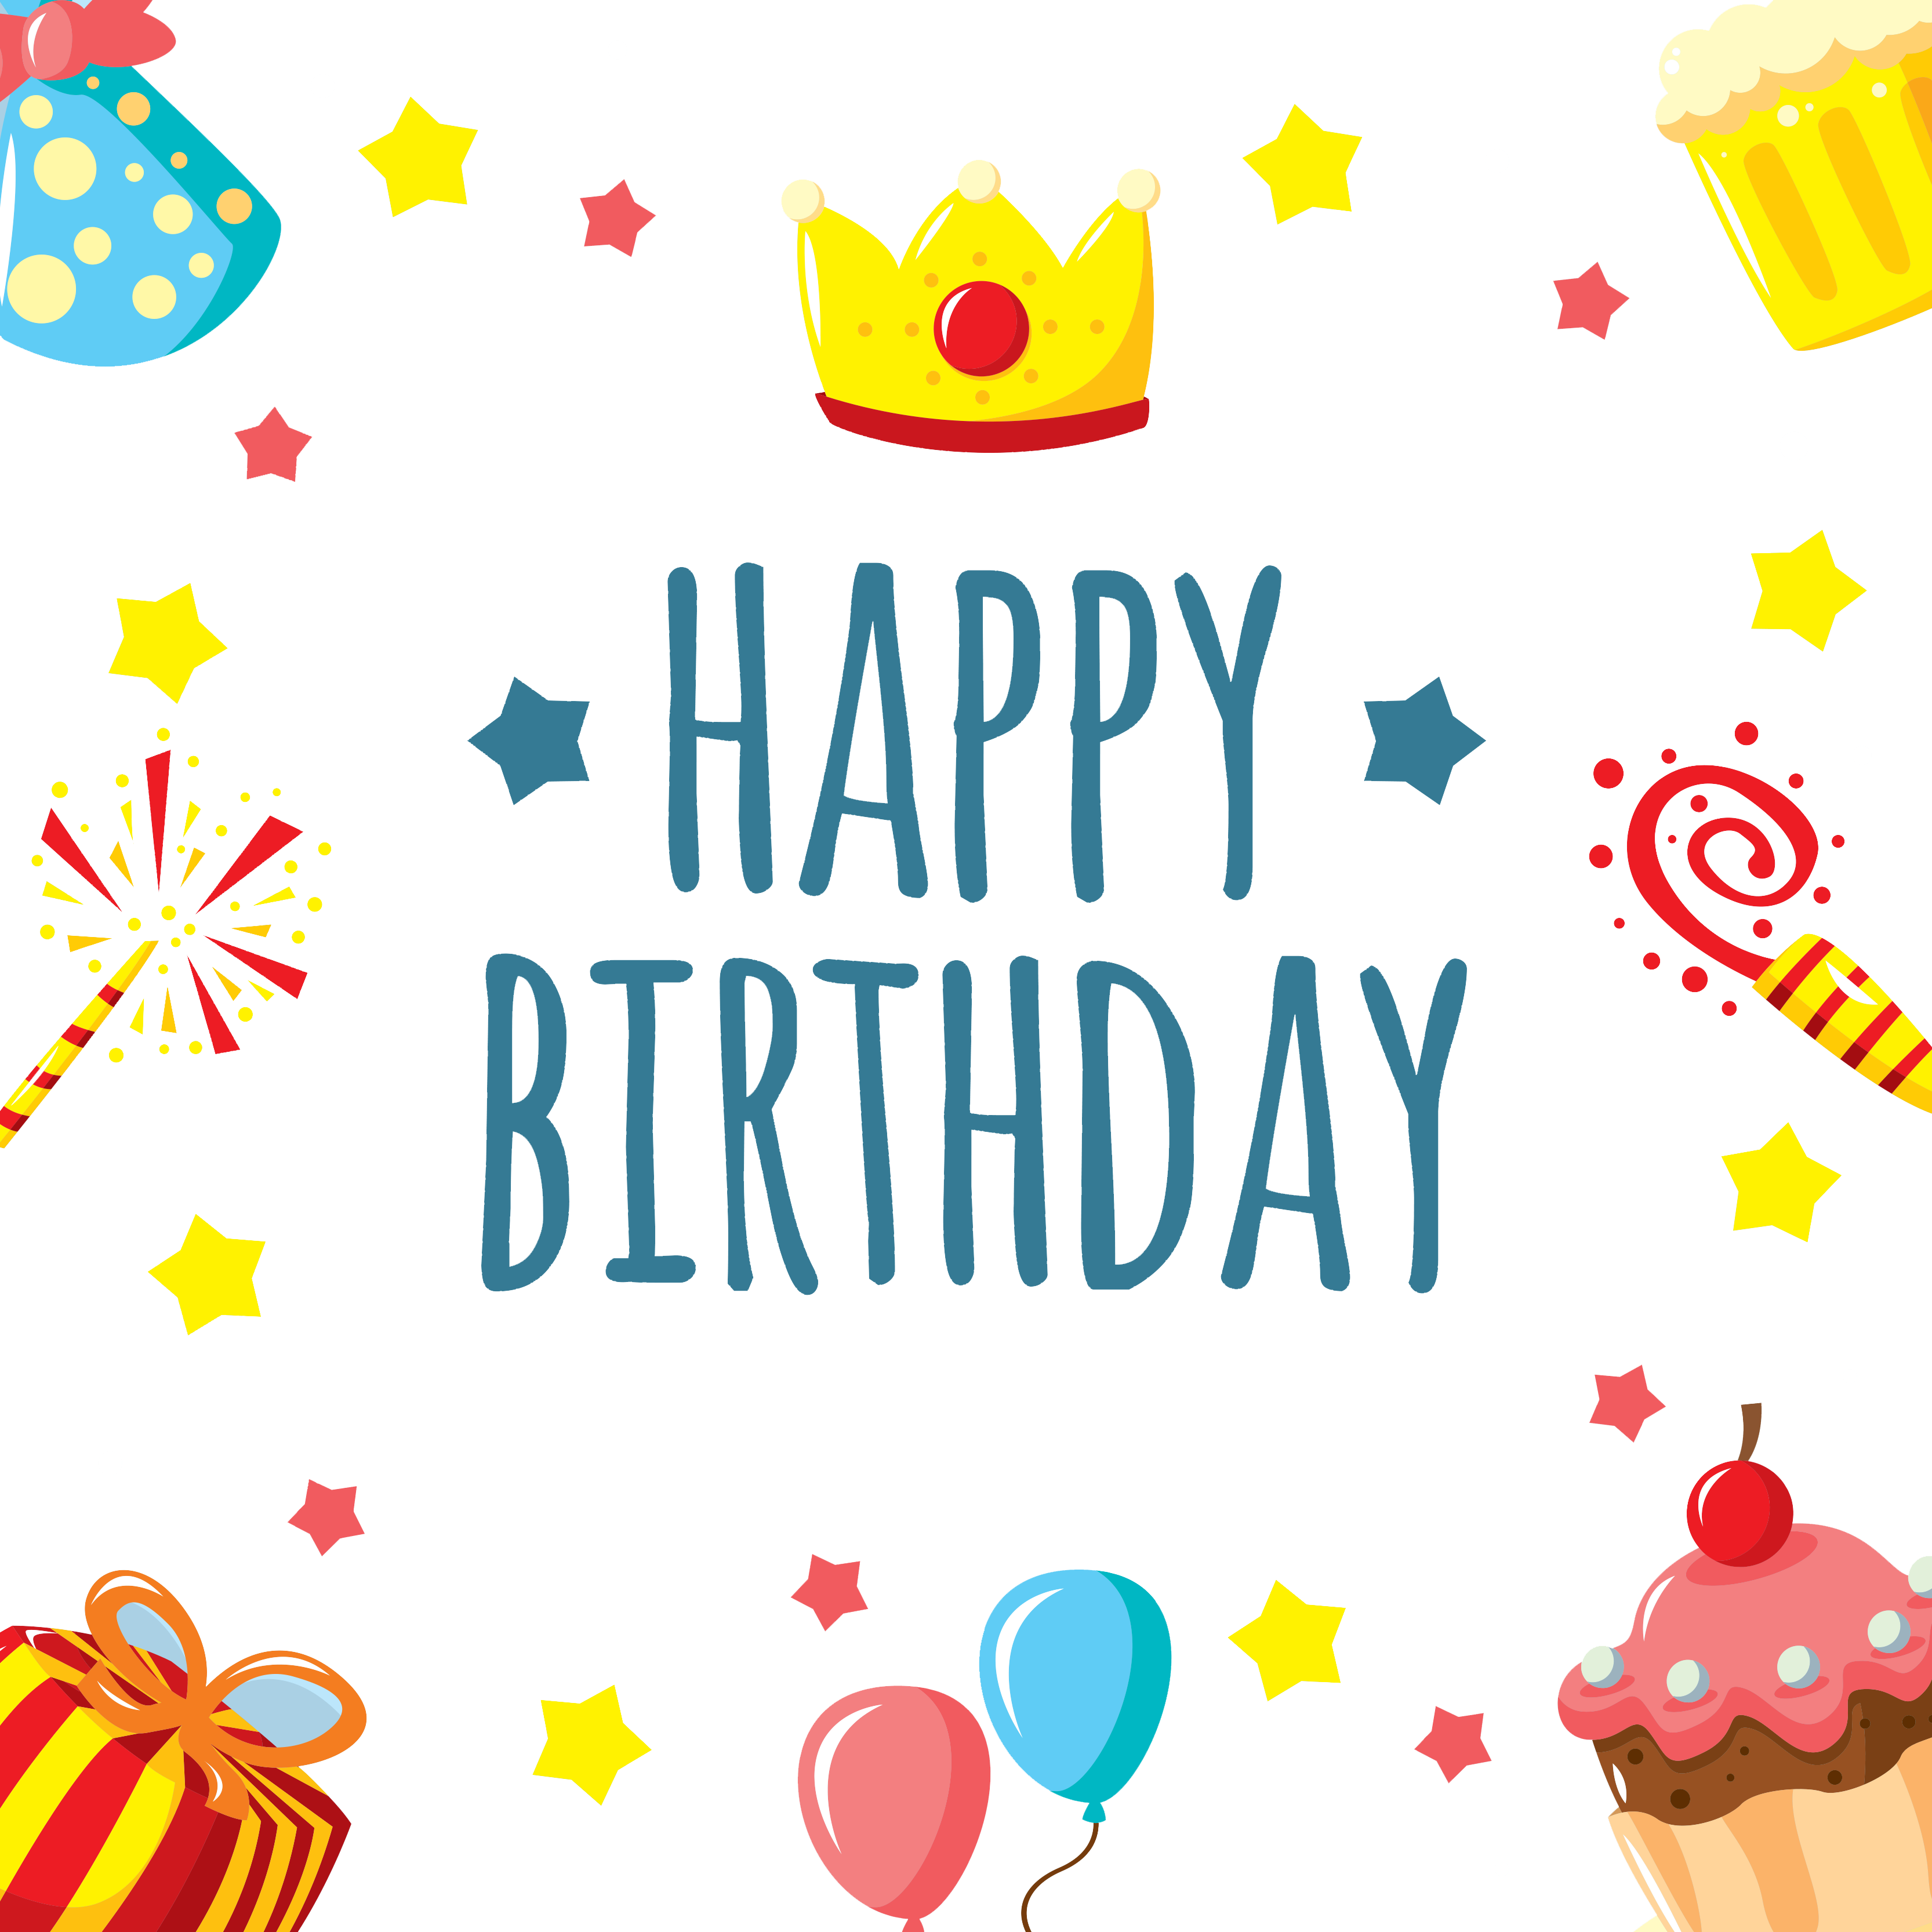 Happy Birthday Brother Clipart at GetDrawings | Free download